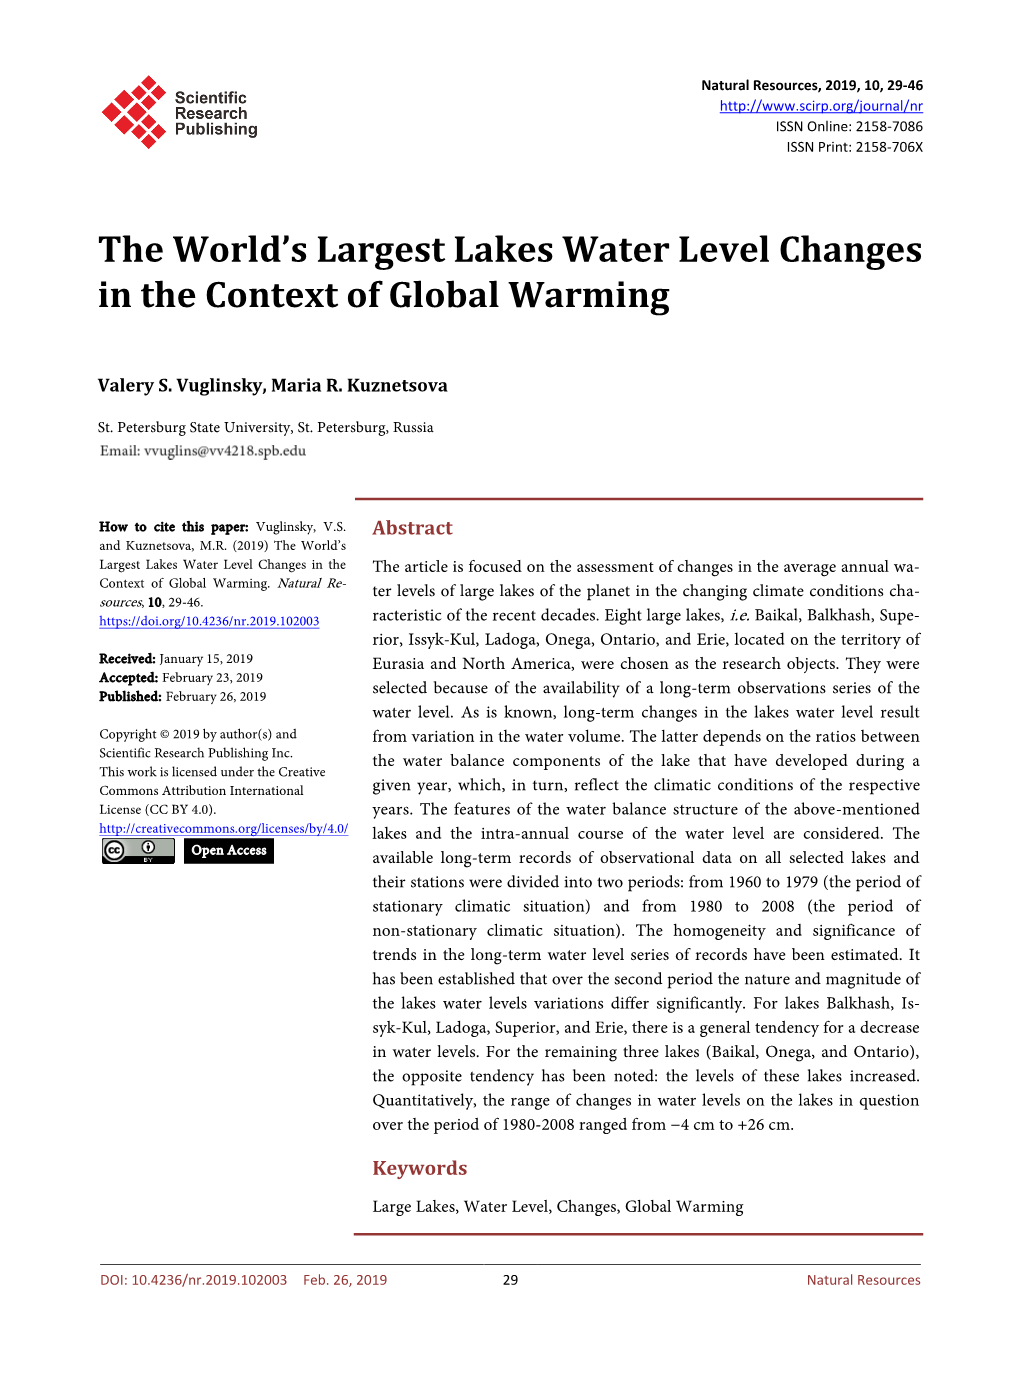 The World's Largest Lakes Water Level Changes in the Context of Global Warming